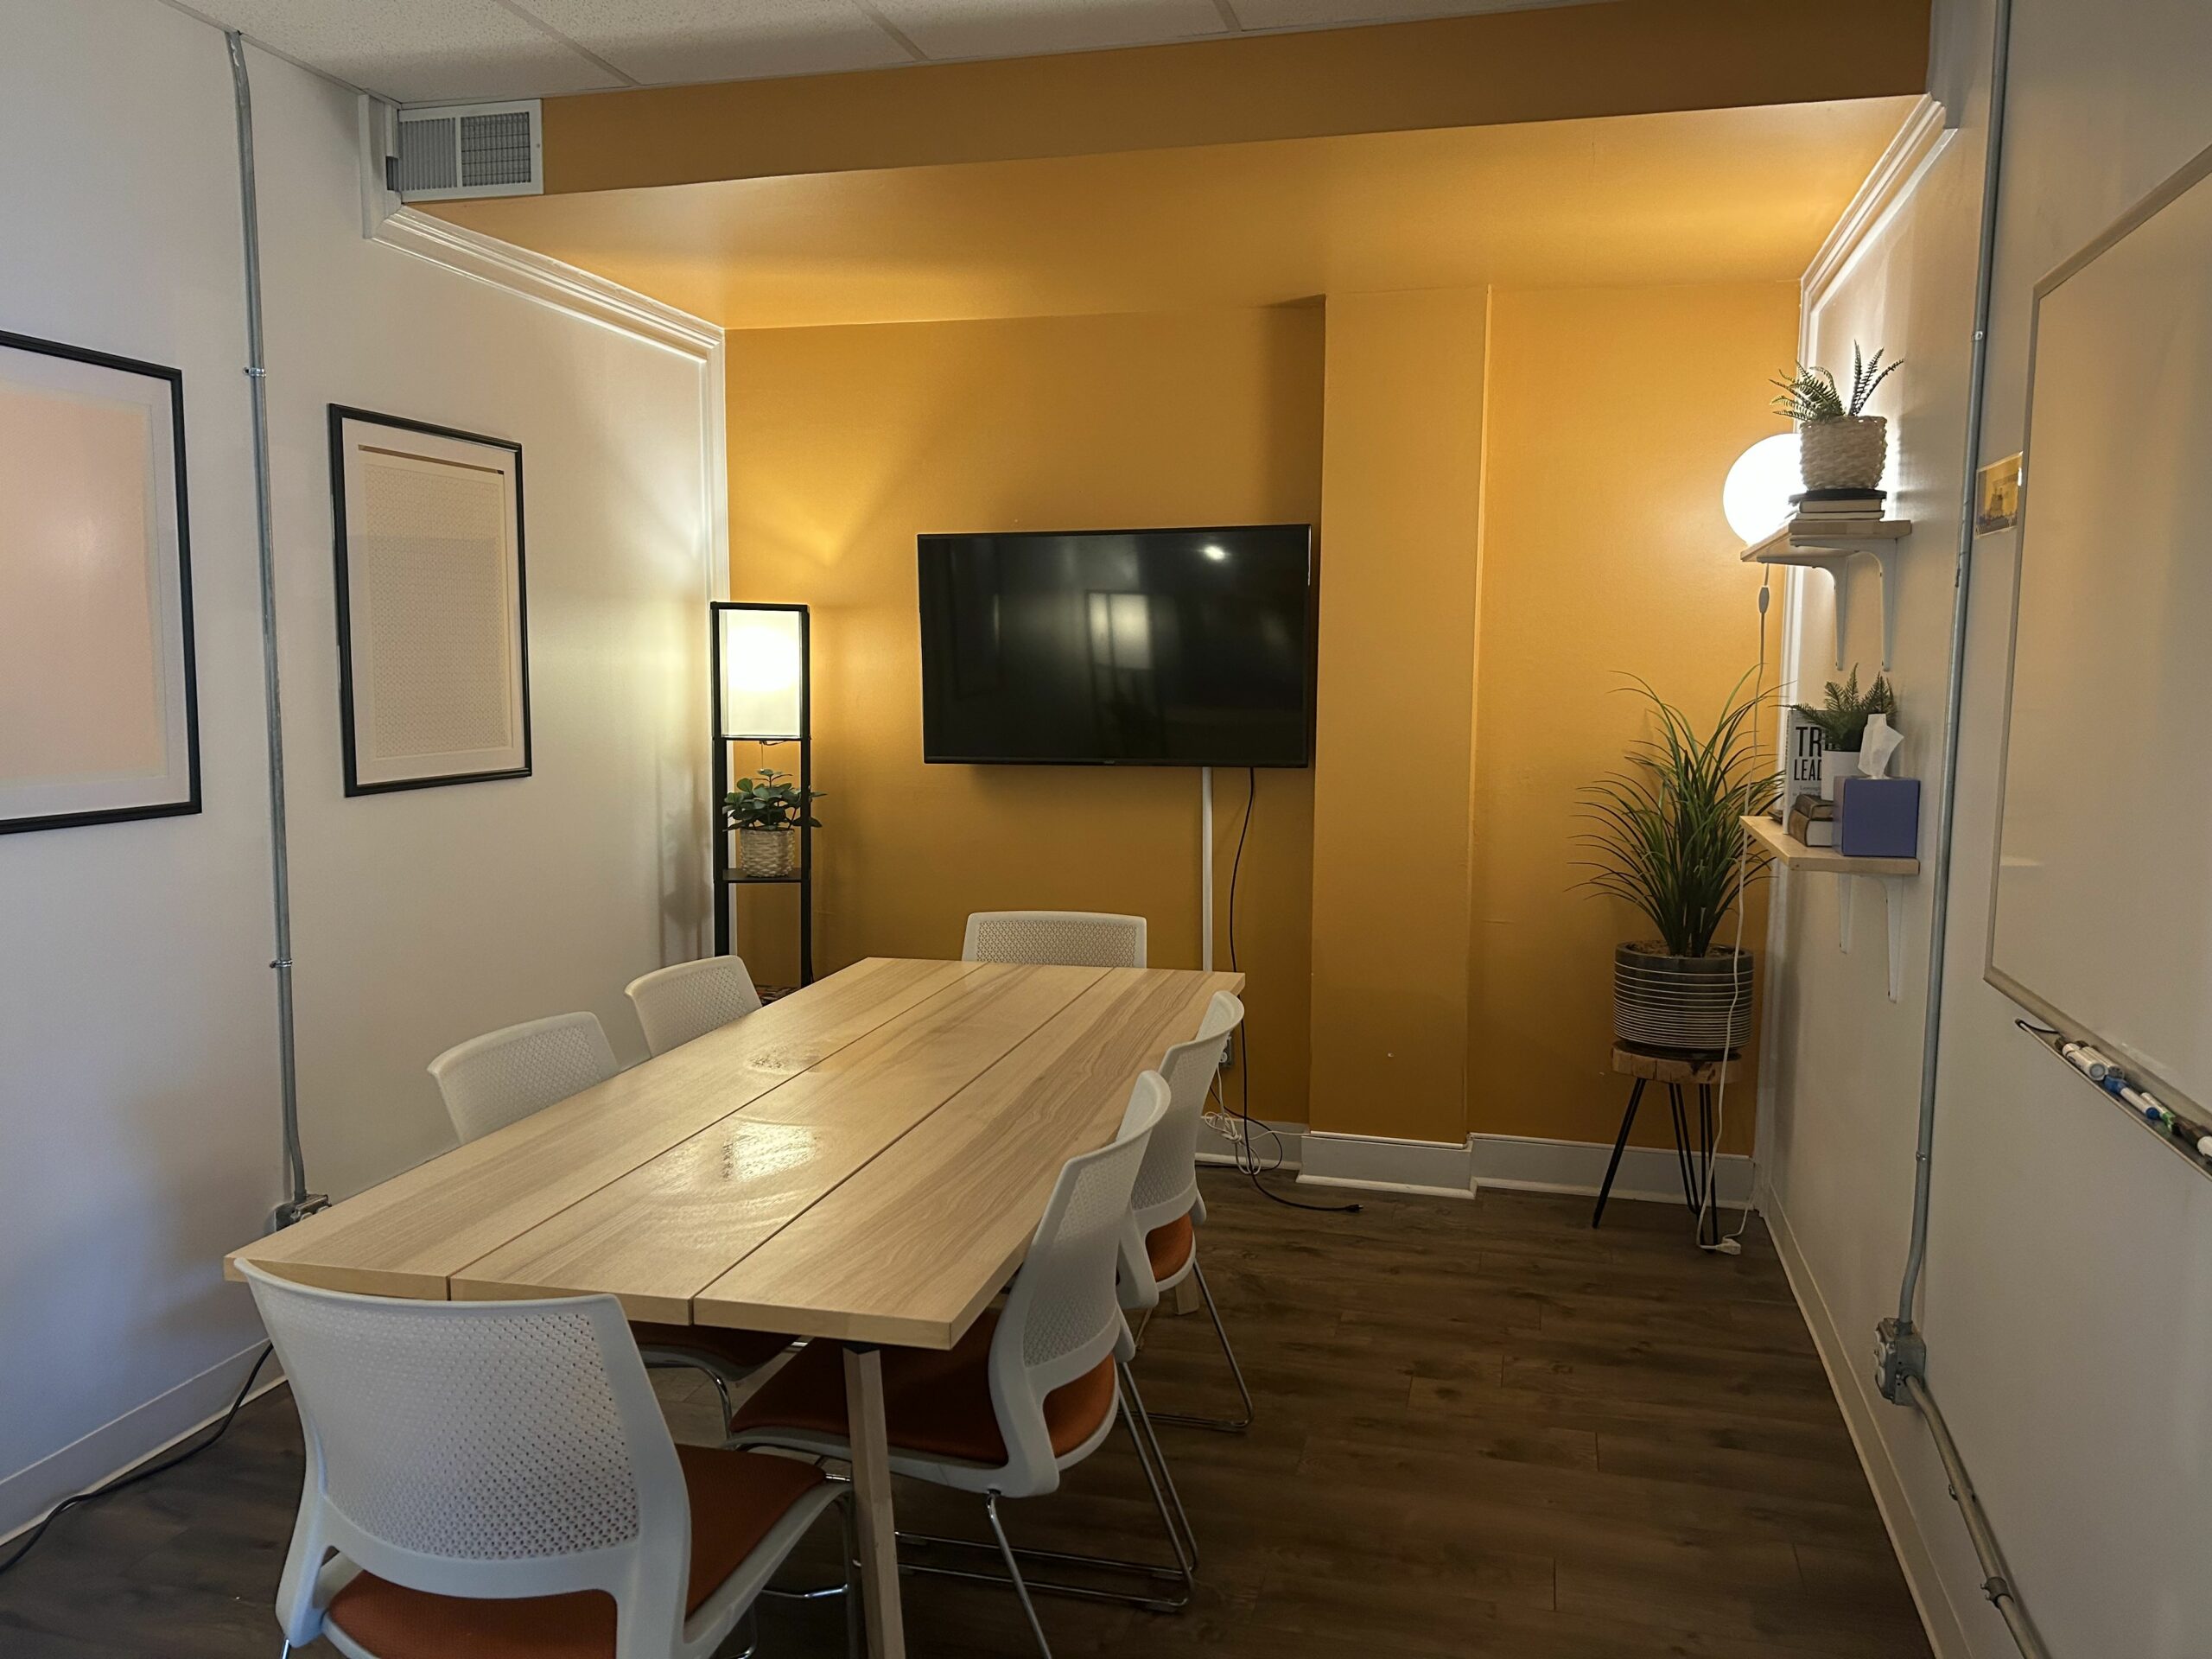 6 person meeting room with orange wall, TV, and whiteboard